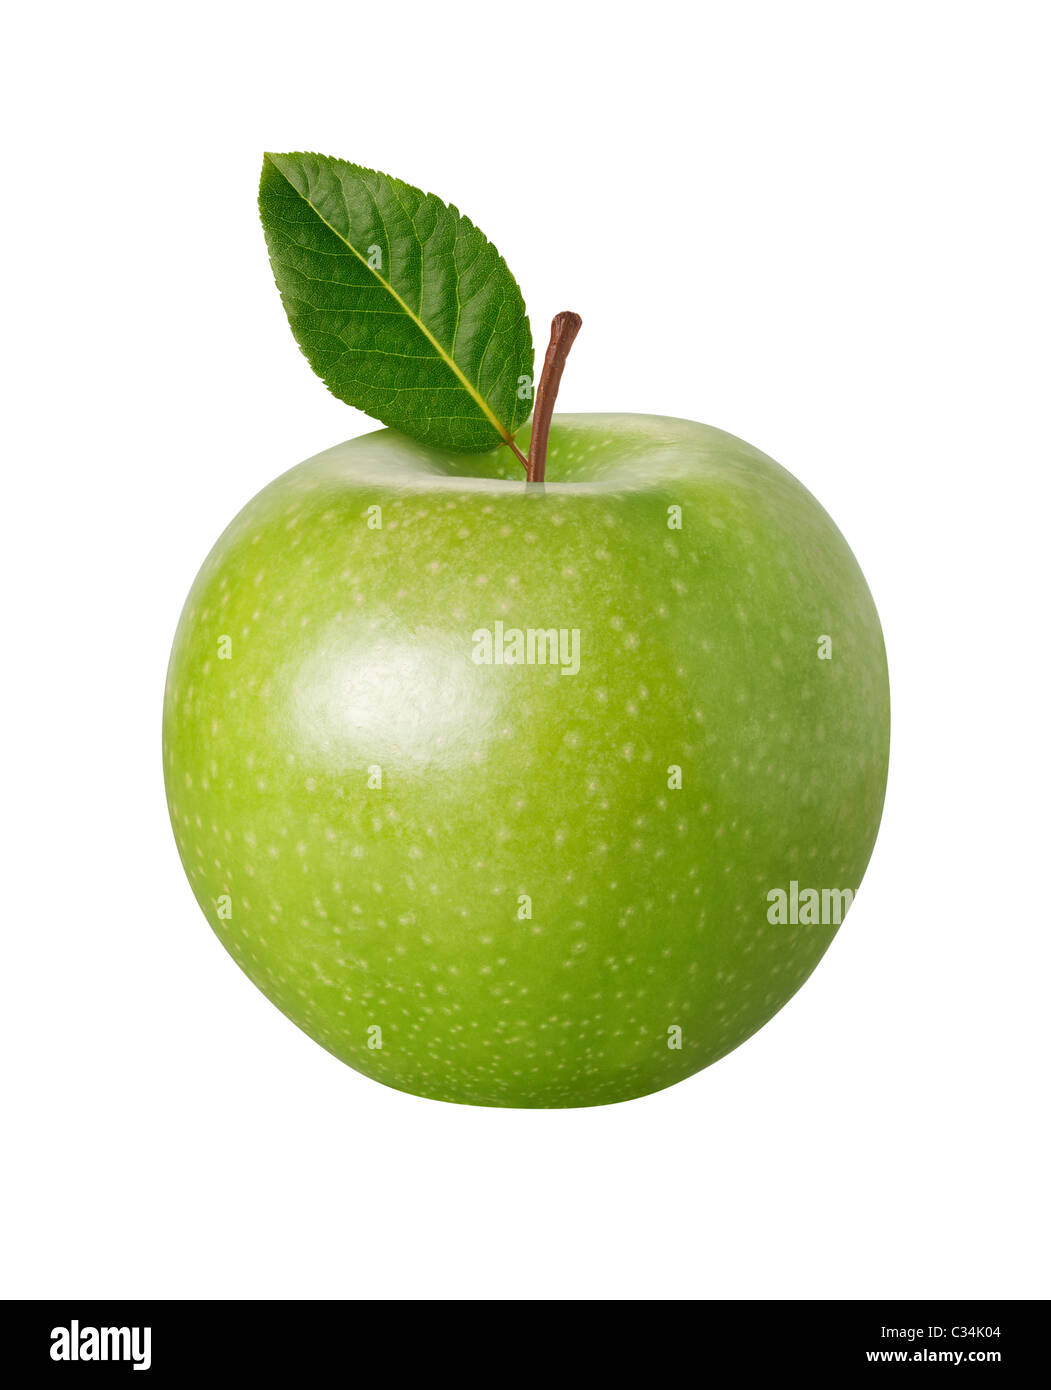 Green Apple Isolated on a white background. Stock Photo